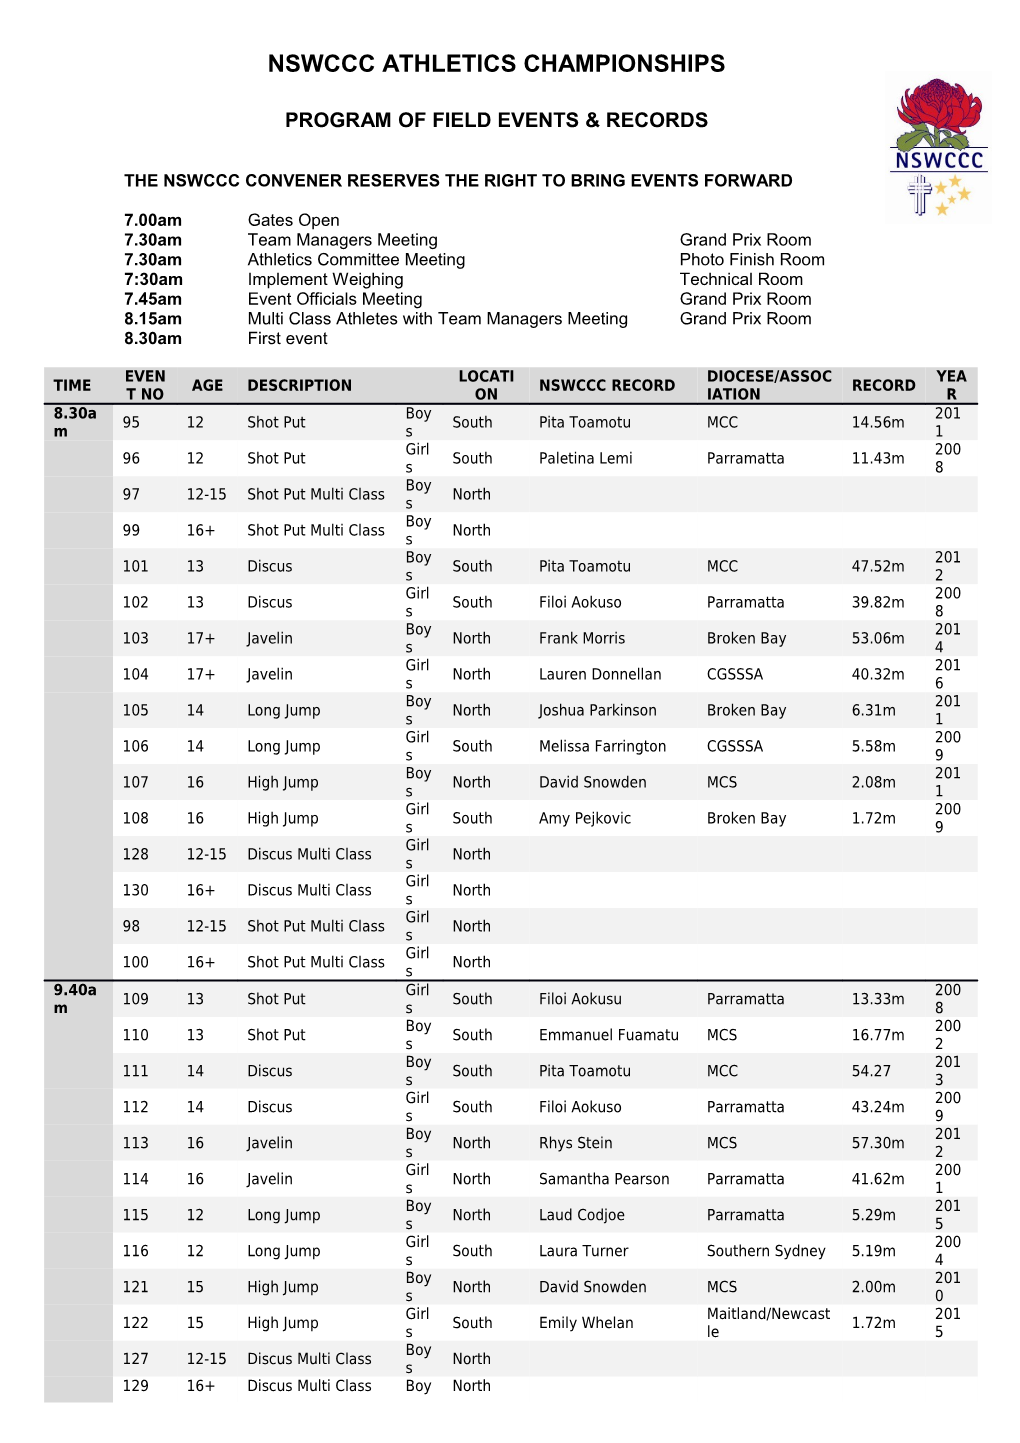 Program of Field Events & Records